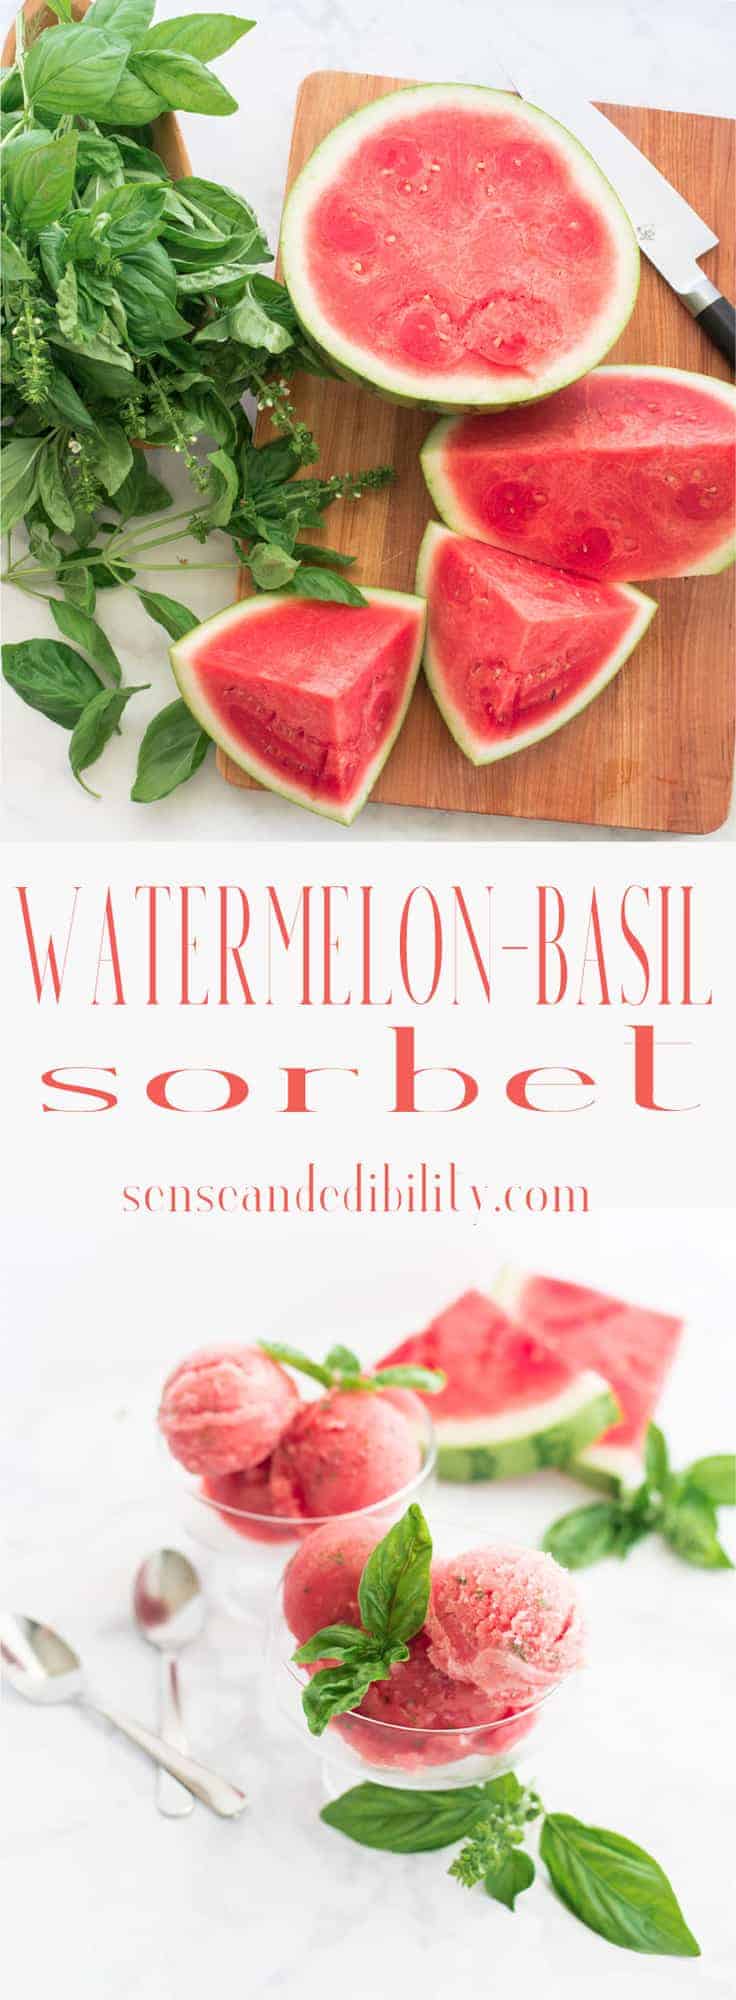 This refreshing watermelon dessert is an herbaceous way to celebrate summer. The added basil provides intense flavor. Made with the freshest of ingredients. #watermelonbasil #sorbet #fruitdessert #icecream #watermelonsorbet via @ediblesense